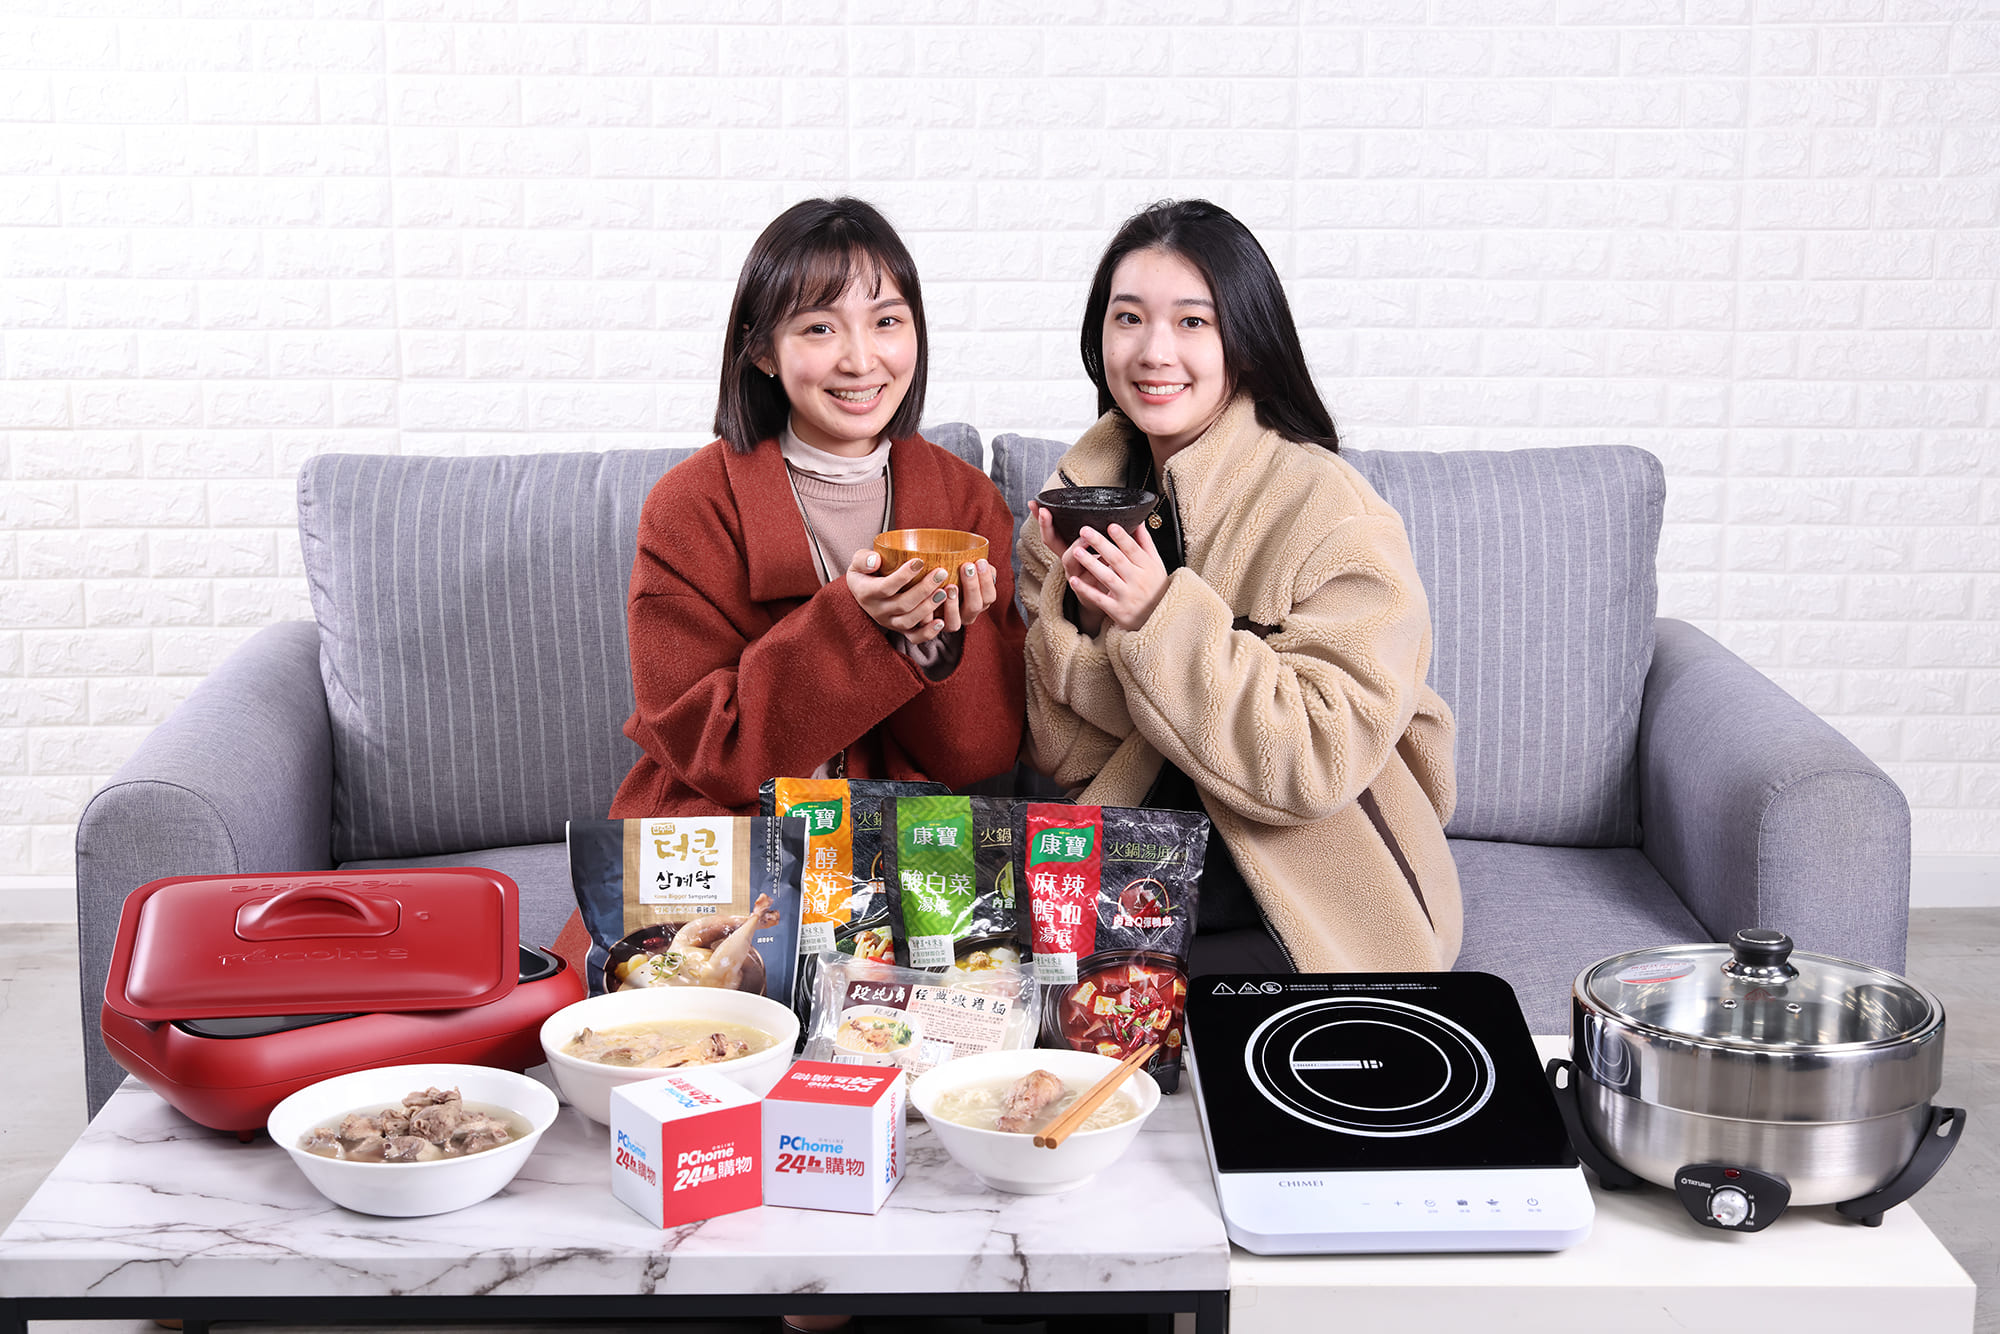 Sales of Home Appliances for Hotpot at PChome 24h Shopping Doubles for the Winter Solstice